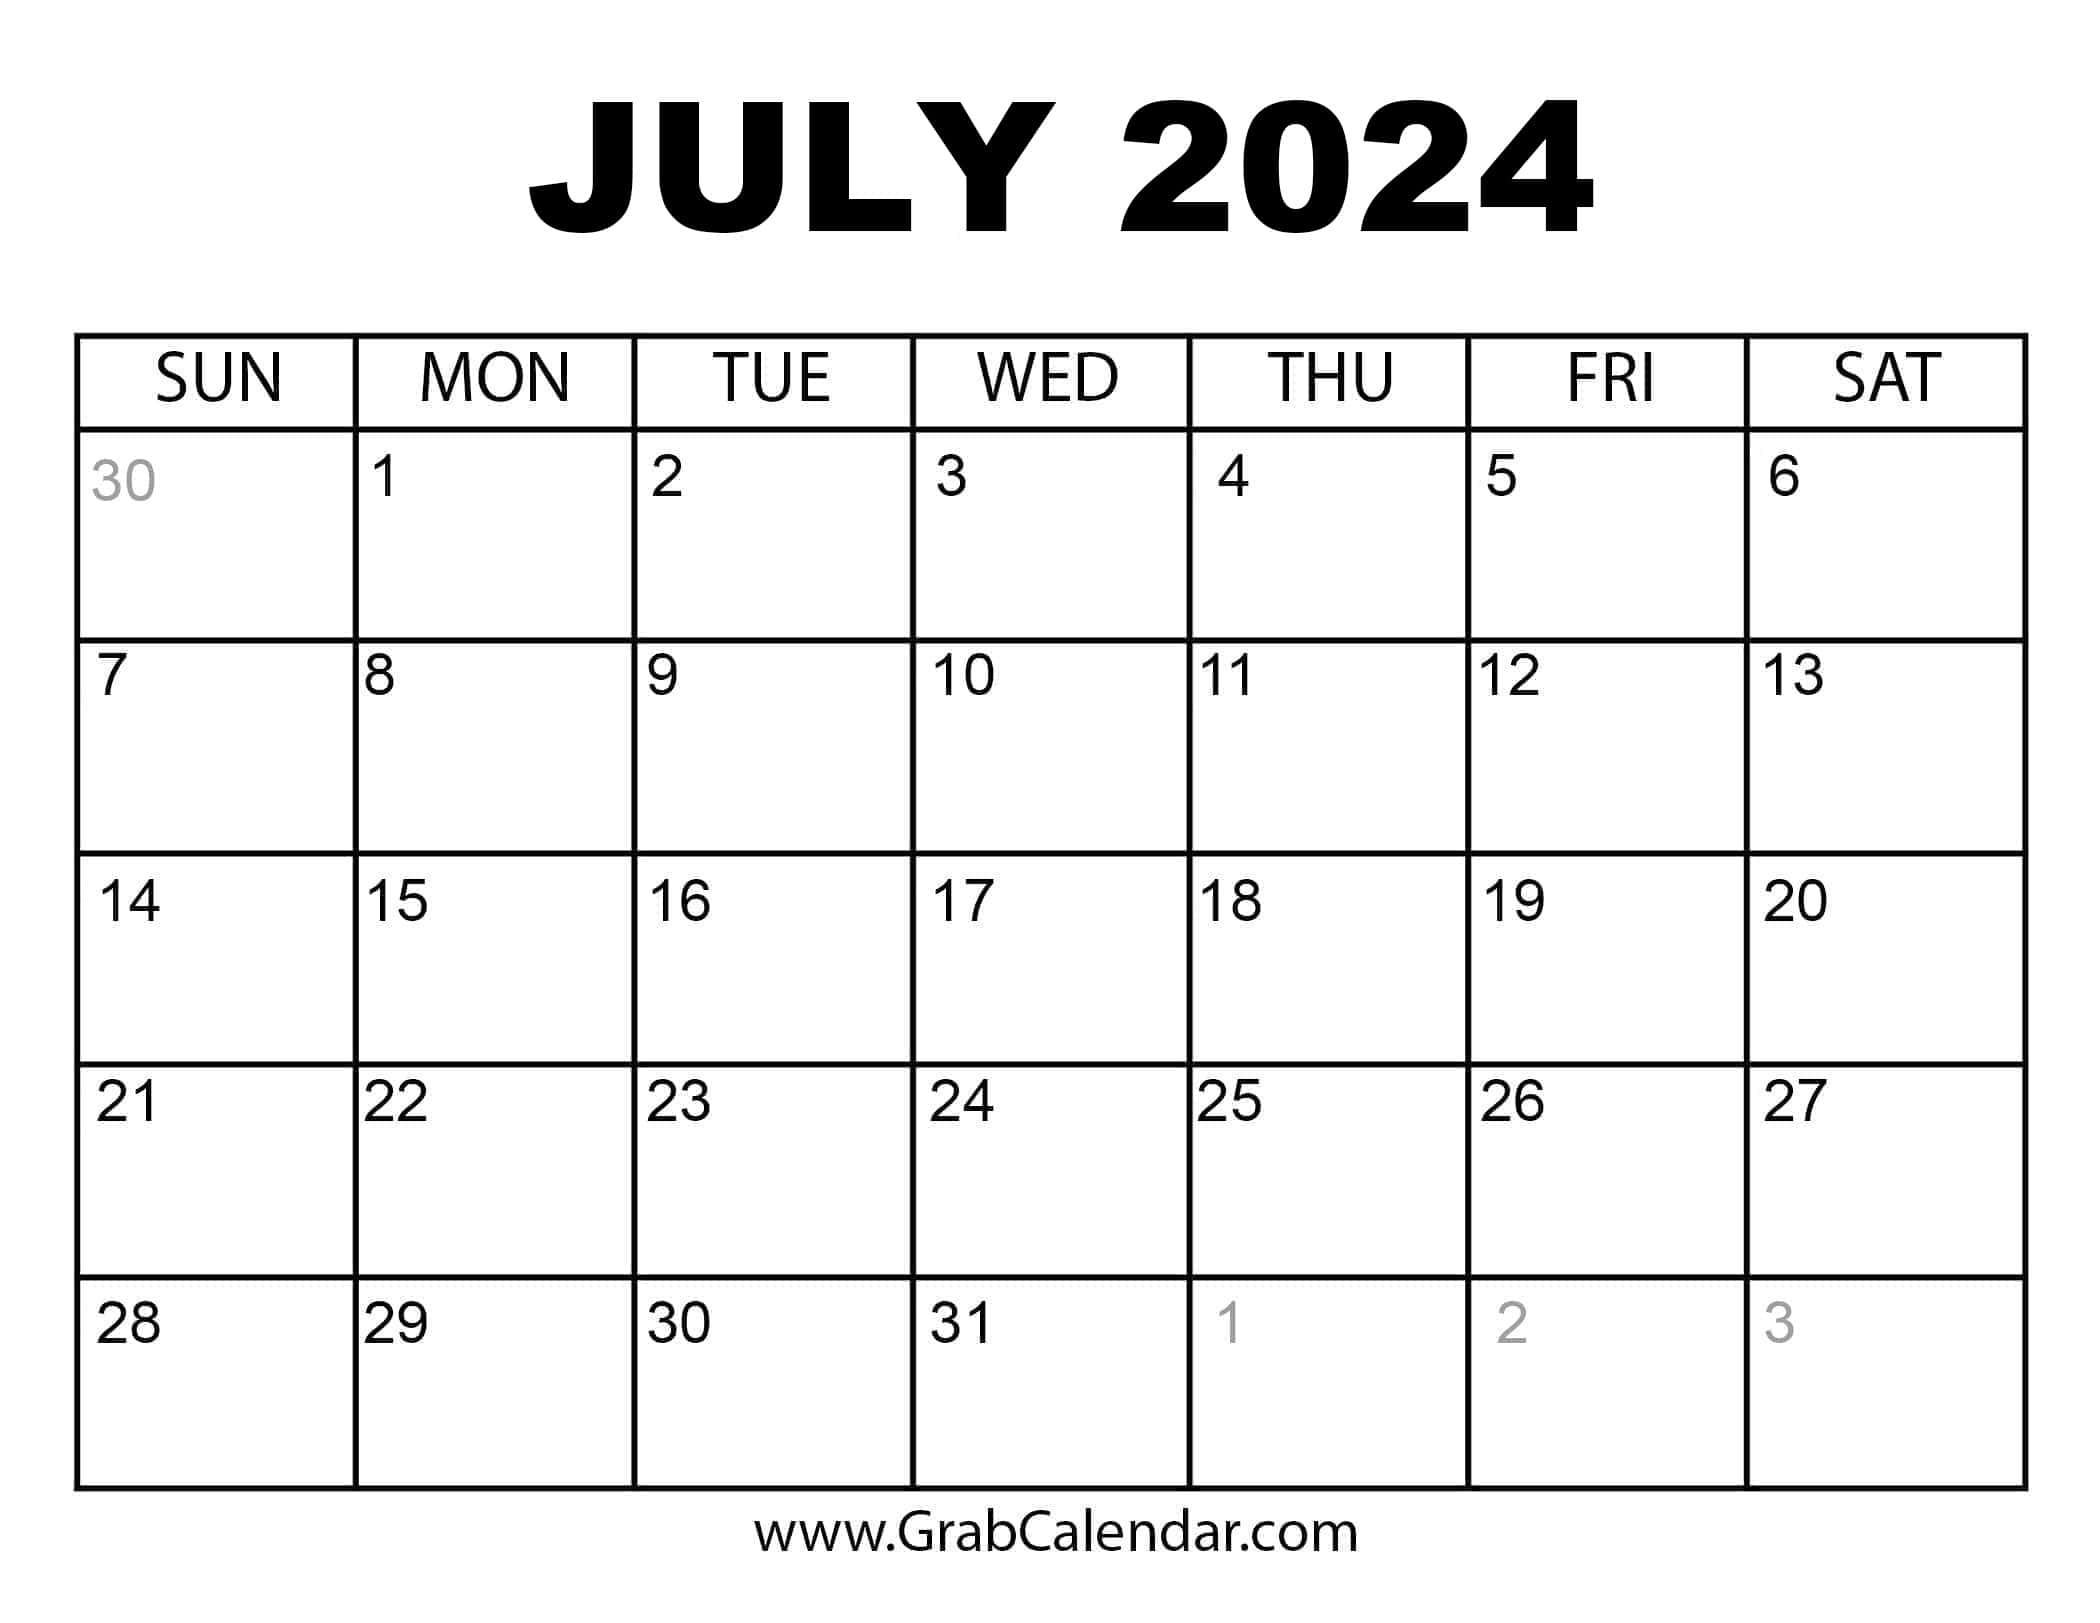 Printable July 2024 Calendar within The Calendar of July 2024